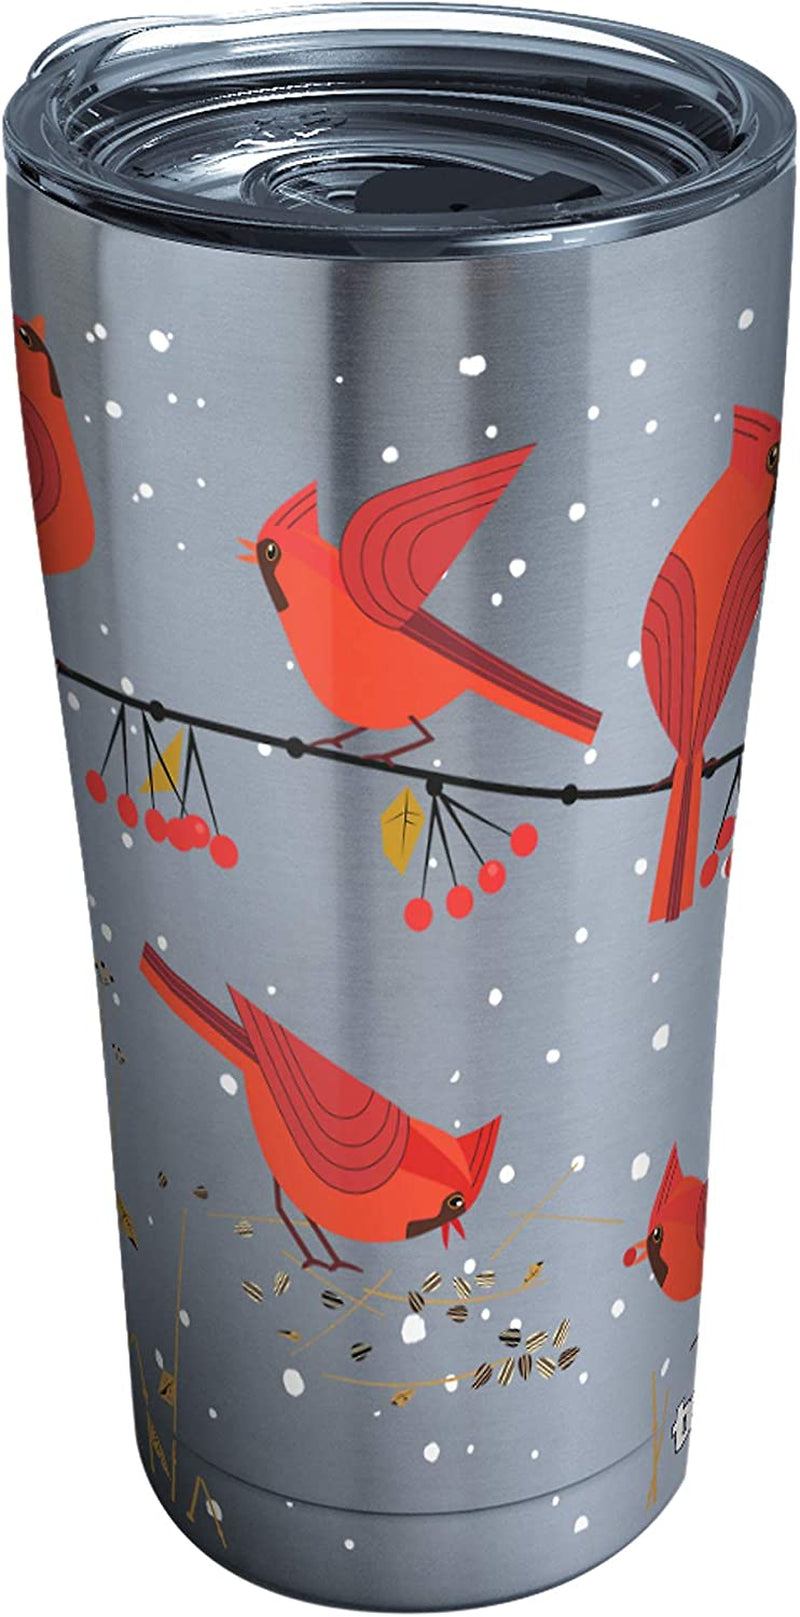 Tervis Made in USA Double Walled Festive Holiday Season Cardinals Insulated Tumbler Cup Keeps Drinks Cold & Hot, 16Oz Mug, Classic Home & Garden > Kitchen & Dining > Tableware > Drinkware Tervis Stainless Steel 20oz 